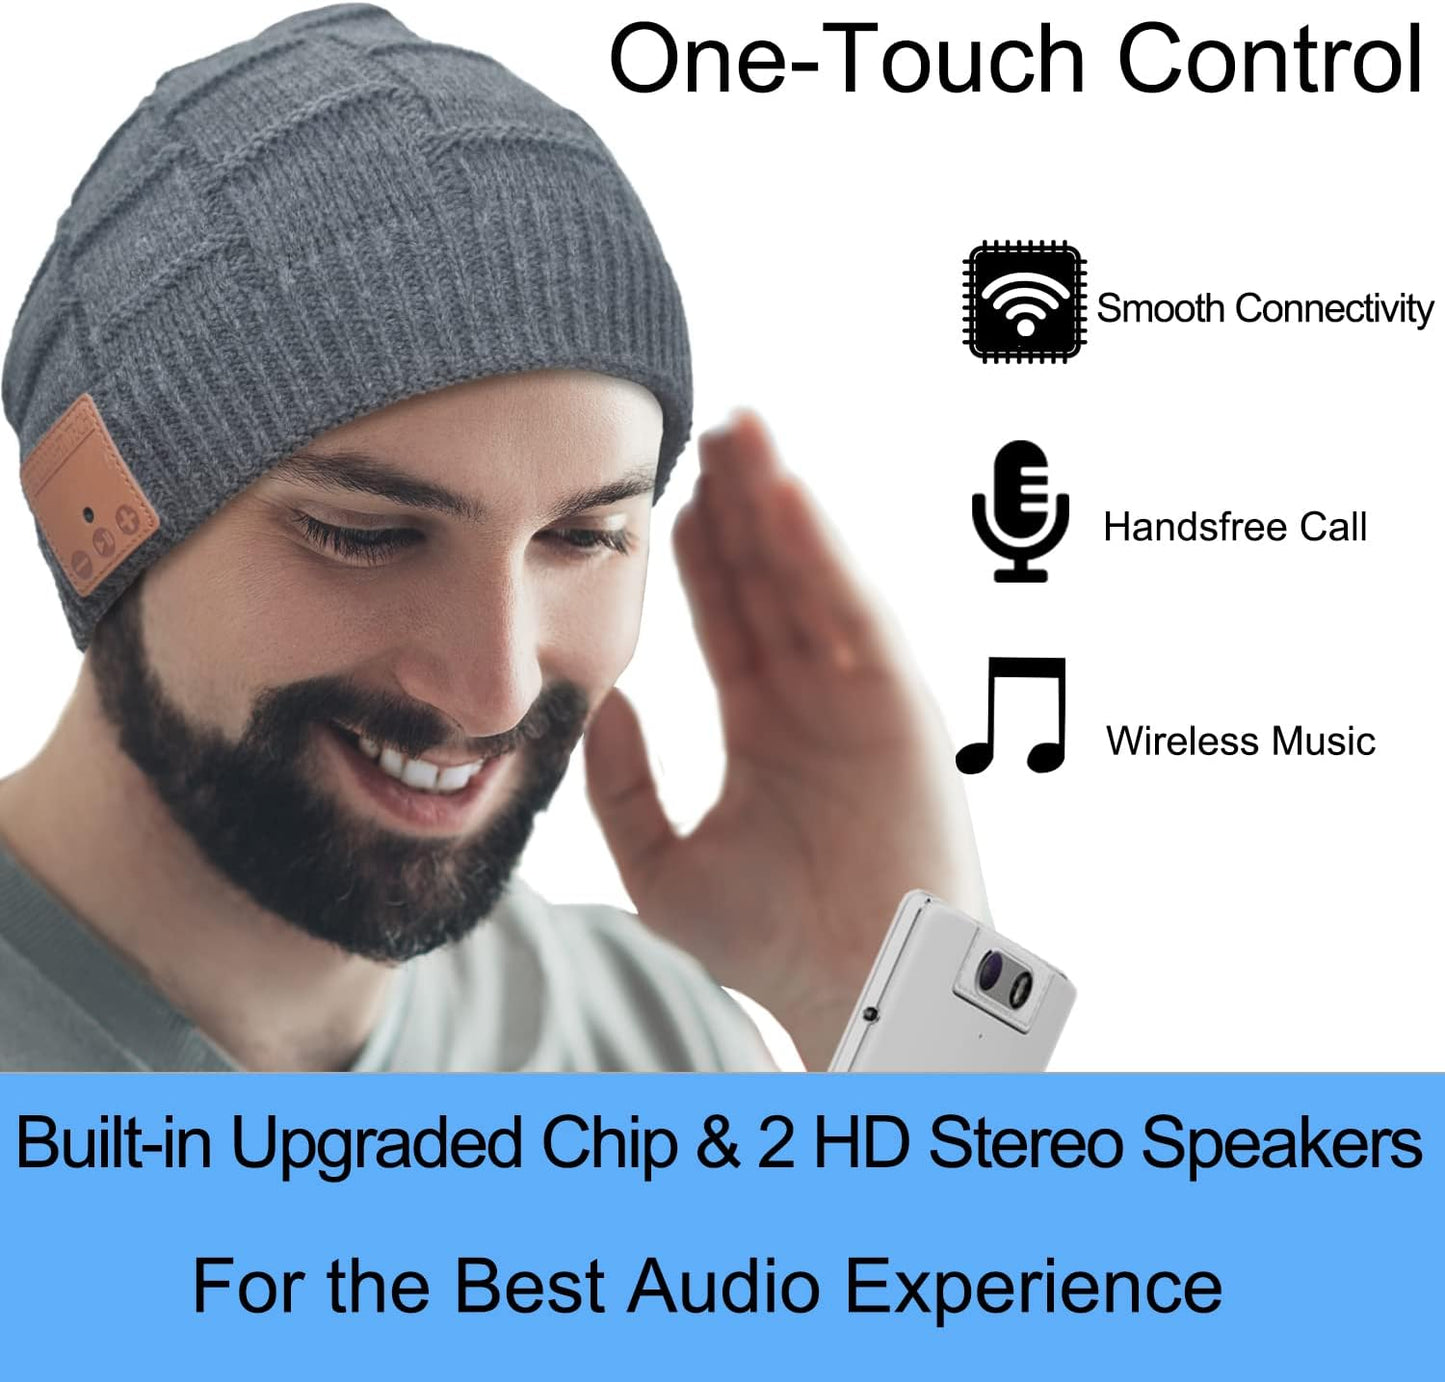 Bluetooth Beanie Hat,Upgraded Hat Headphones Headset Winter Music Hat Knit Running Cap with Speakers & Mic Unique Christmas Tech Gifts for Women Mom Her Him Men Teens Boys Girls